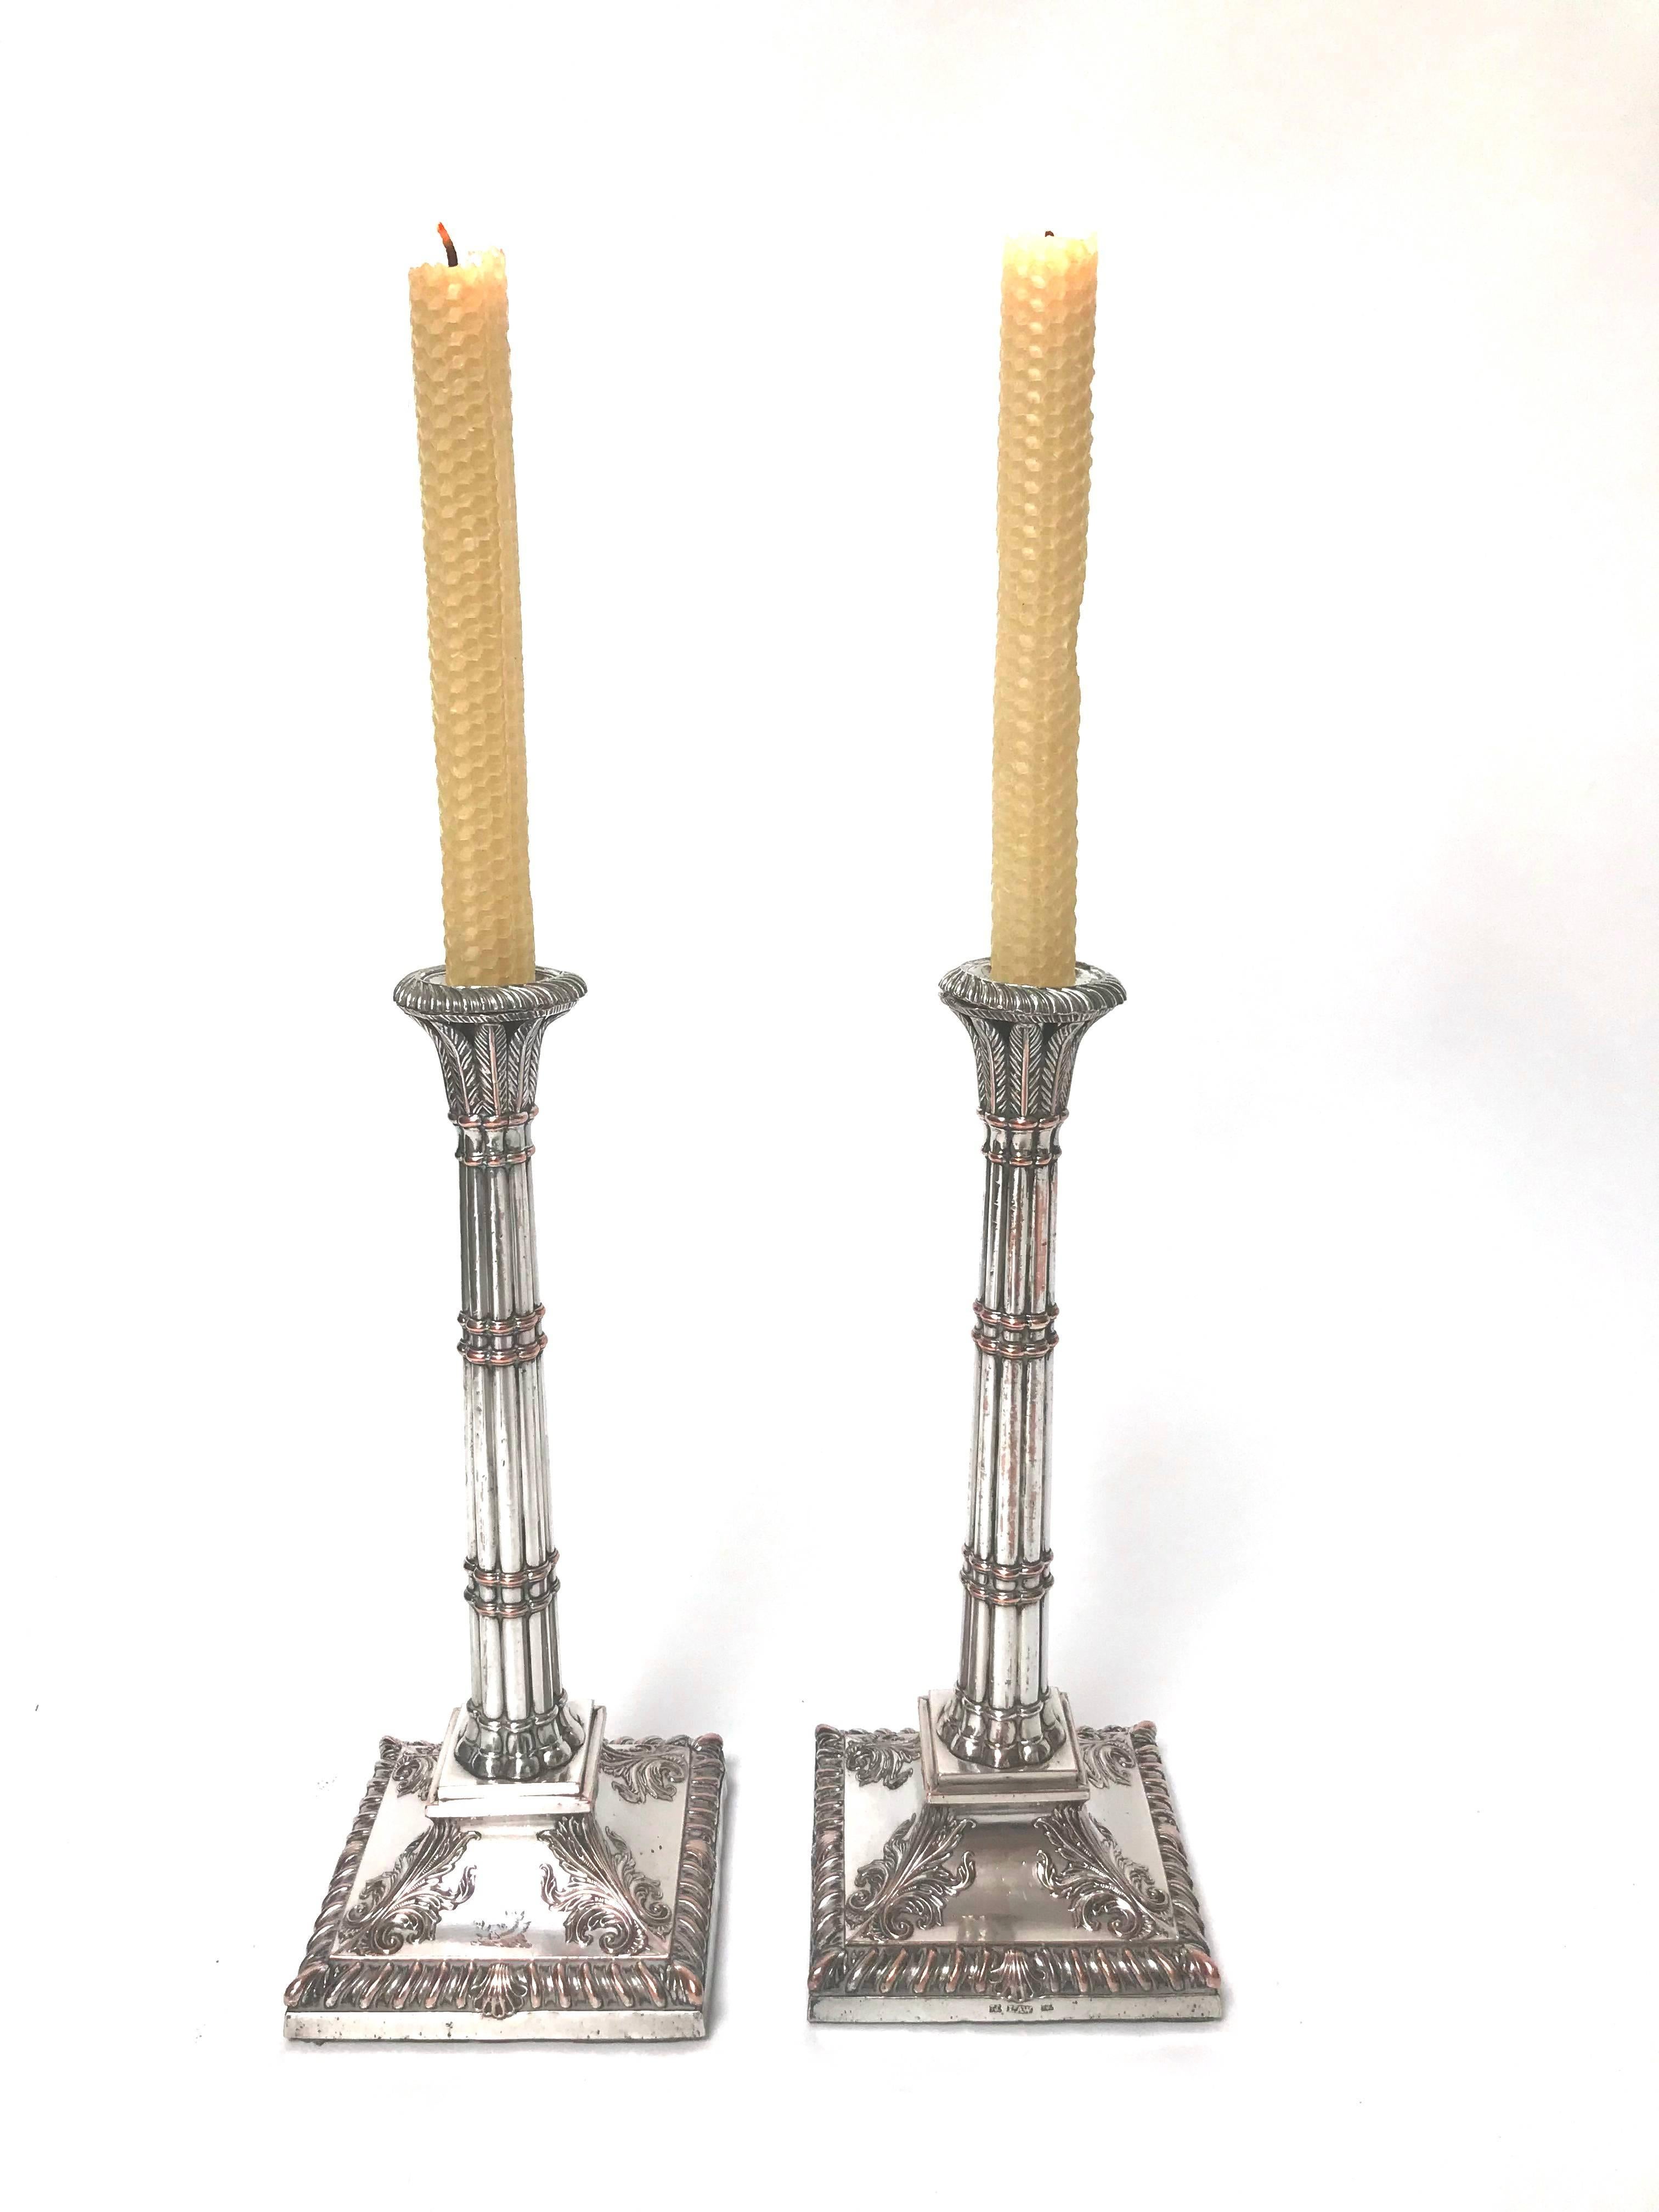 Pair of 18th Century Irish Silver-Plate Candlesticks For Sale 1